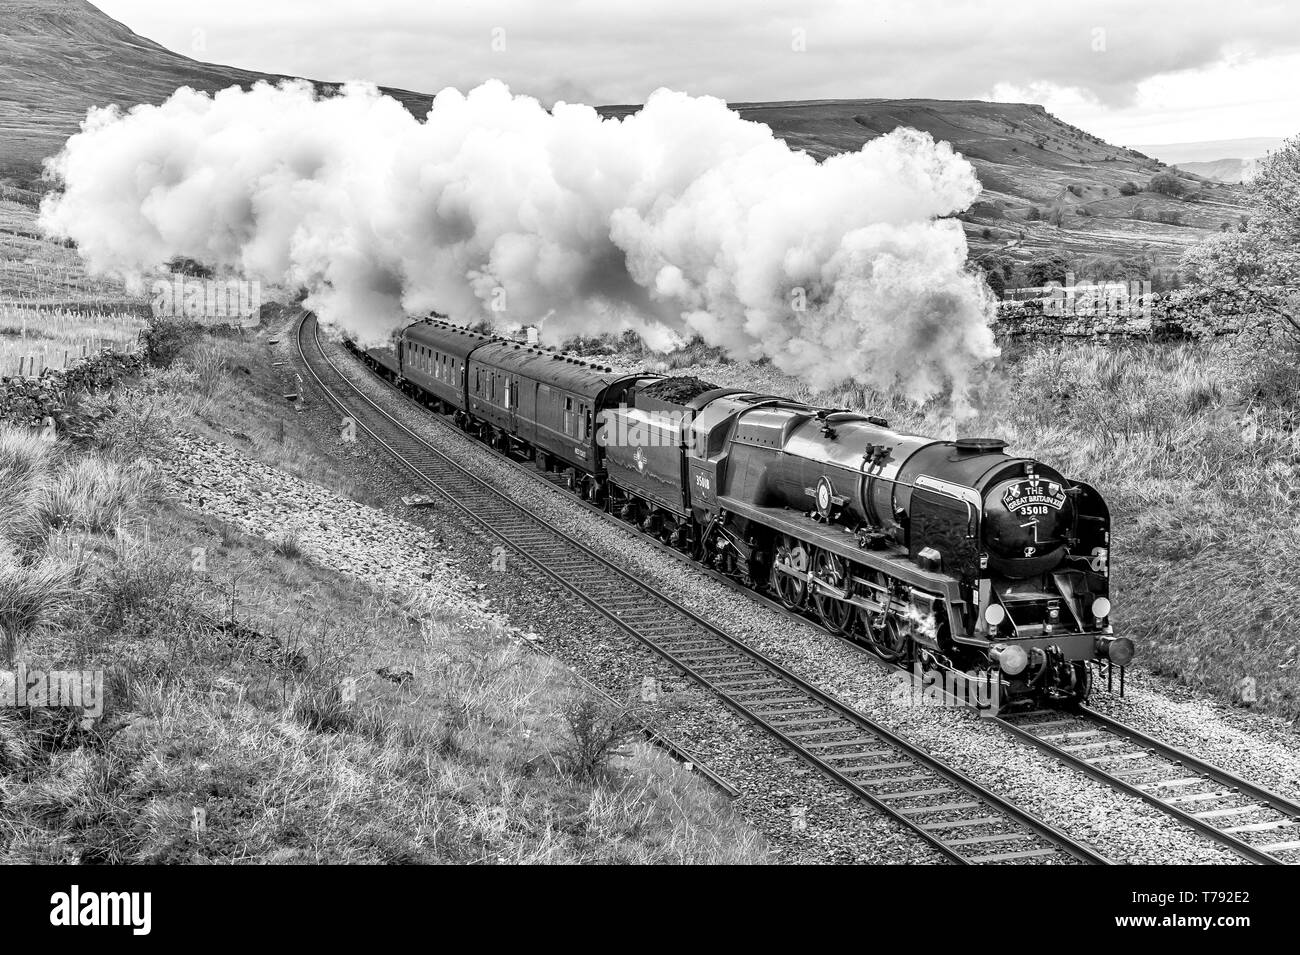 The Southern Railways Merchant Navy Class 6MT 4-6-2 nos 35018 British India Line passing through Ais Gill in the Yorkshire Dales Stock Photo